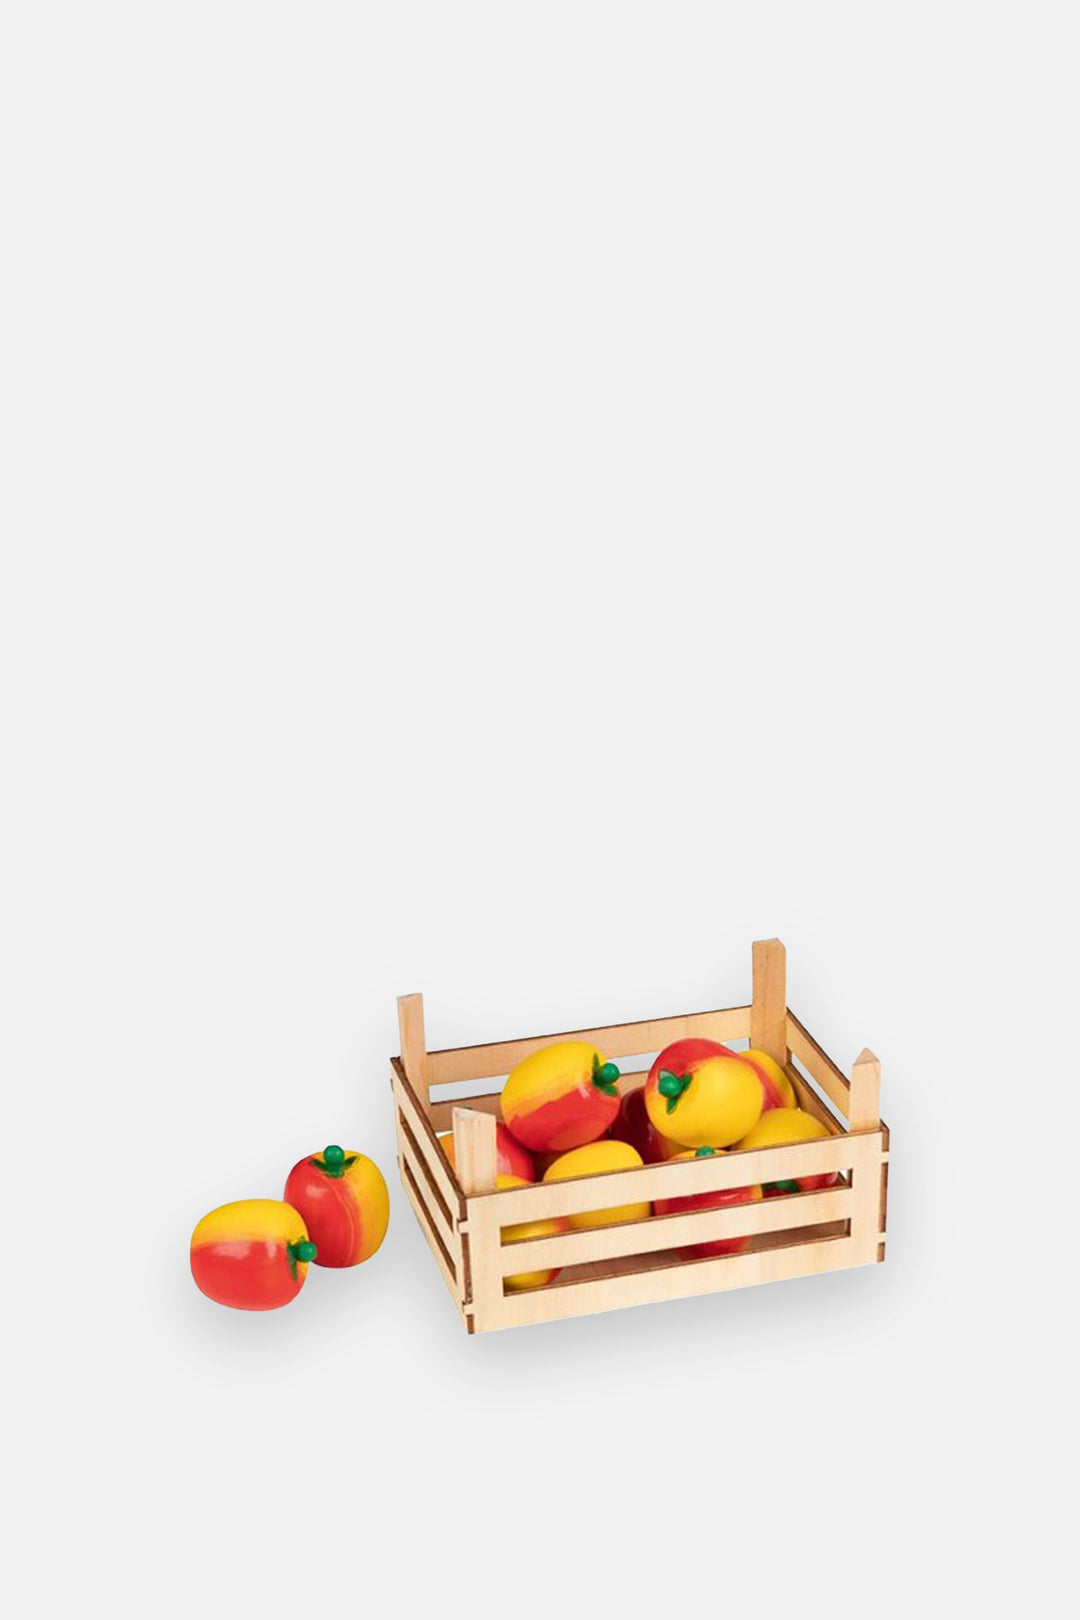 Wooden Toy Apples in Crate / 10 pieces